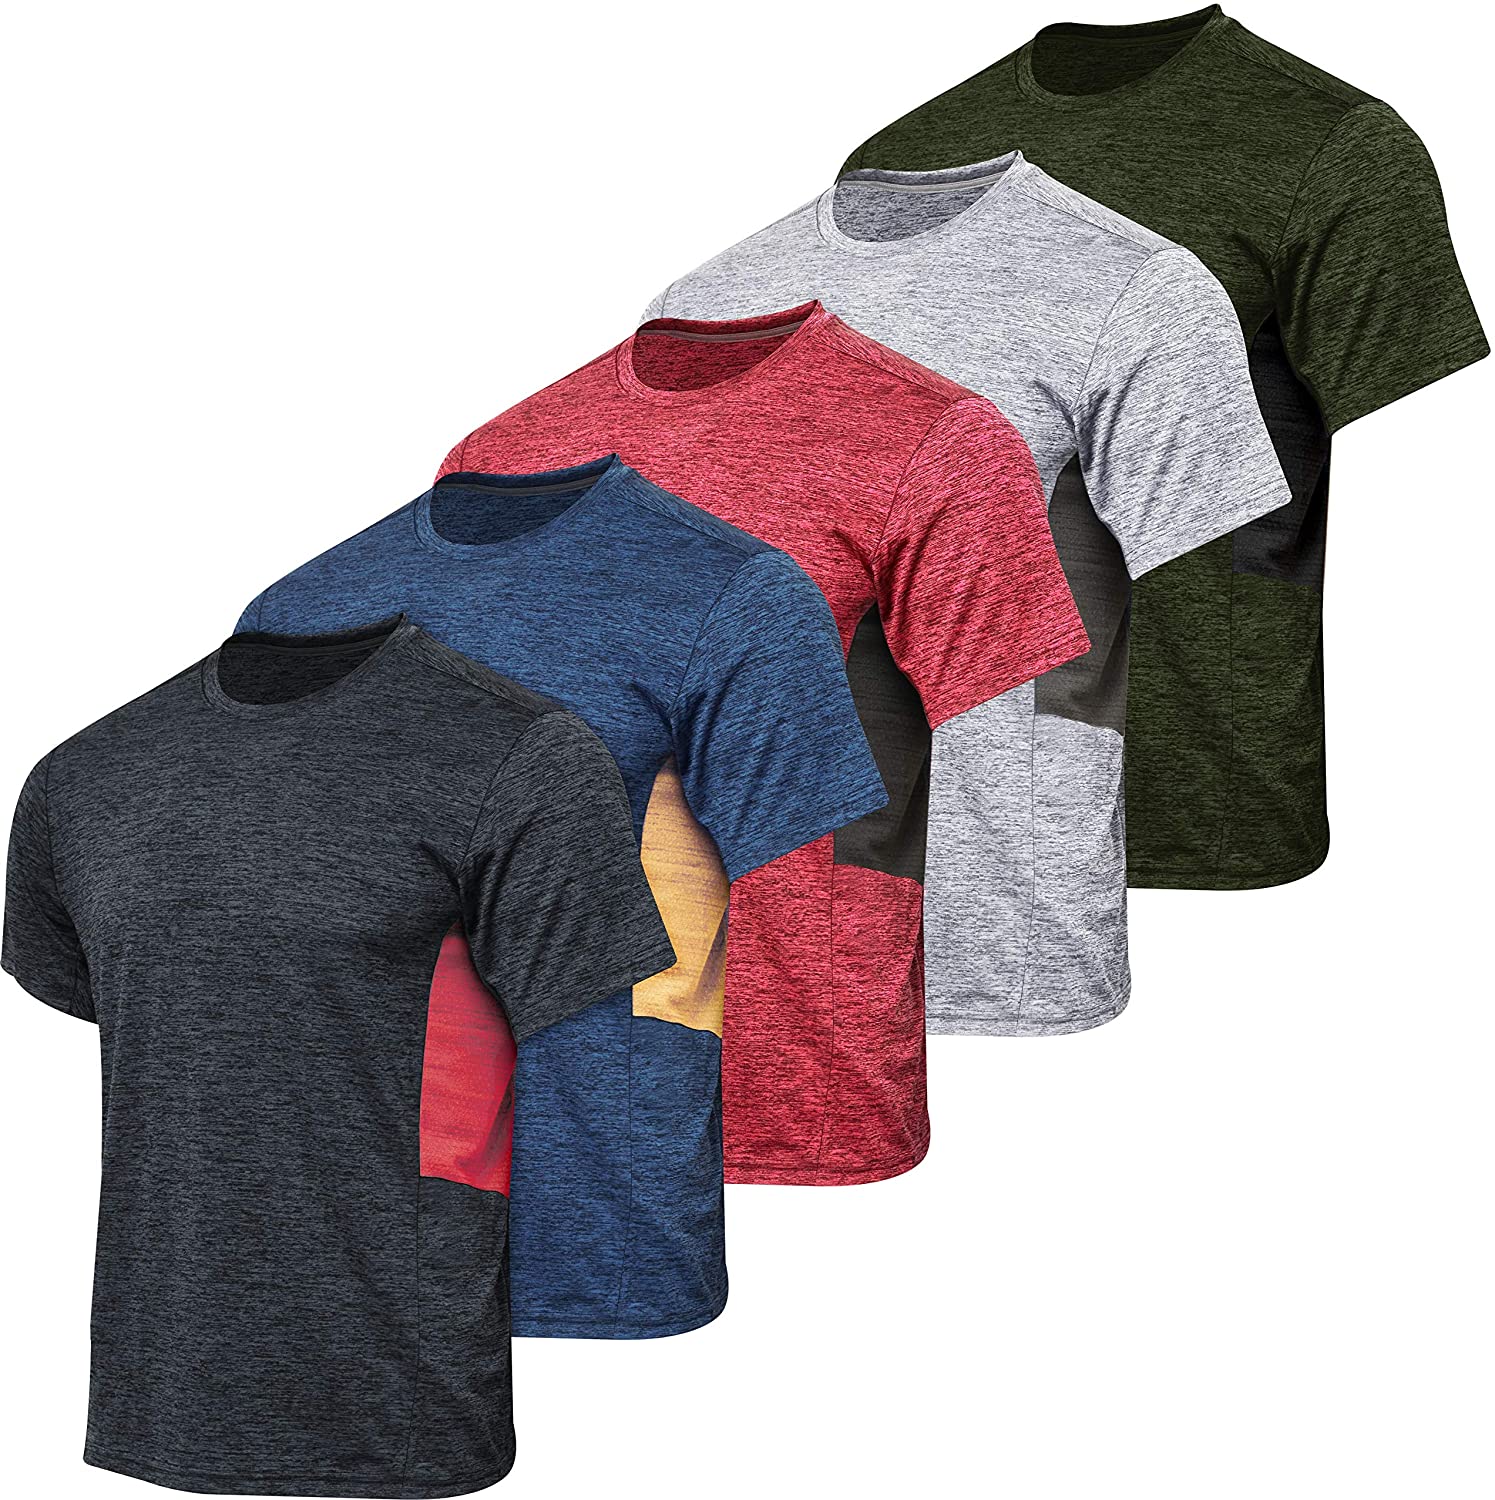 Men’s Dry-Fit Moisture Wicking Active Athletic Performance Crew T-Shirt 5 Pack 